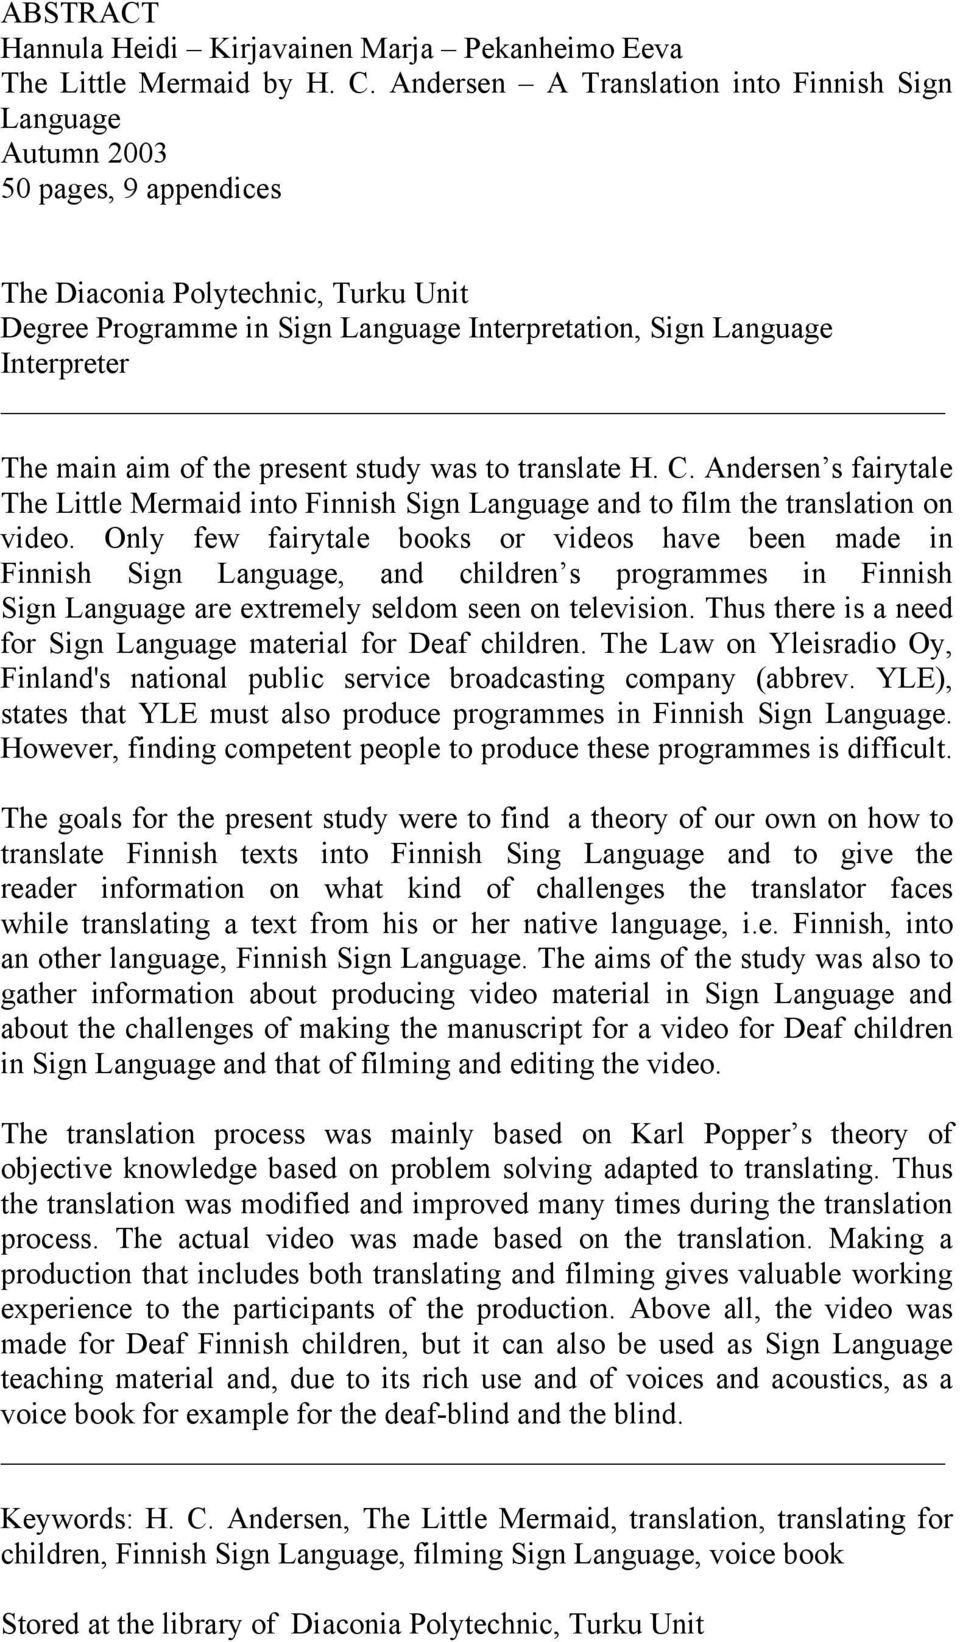 The main aim of the present study was to translate H. C. Andersen s fairytale The Little Mermaid into Finnish Sign Language and to film the translation on video.